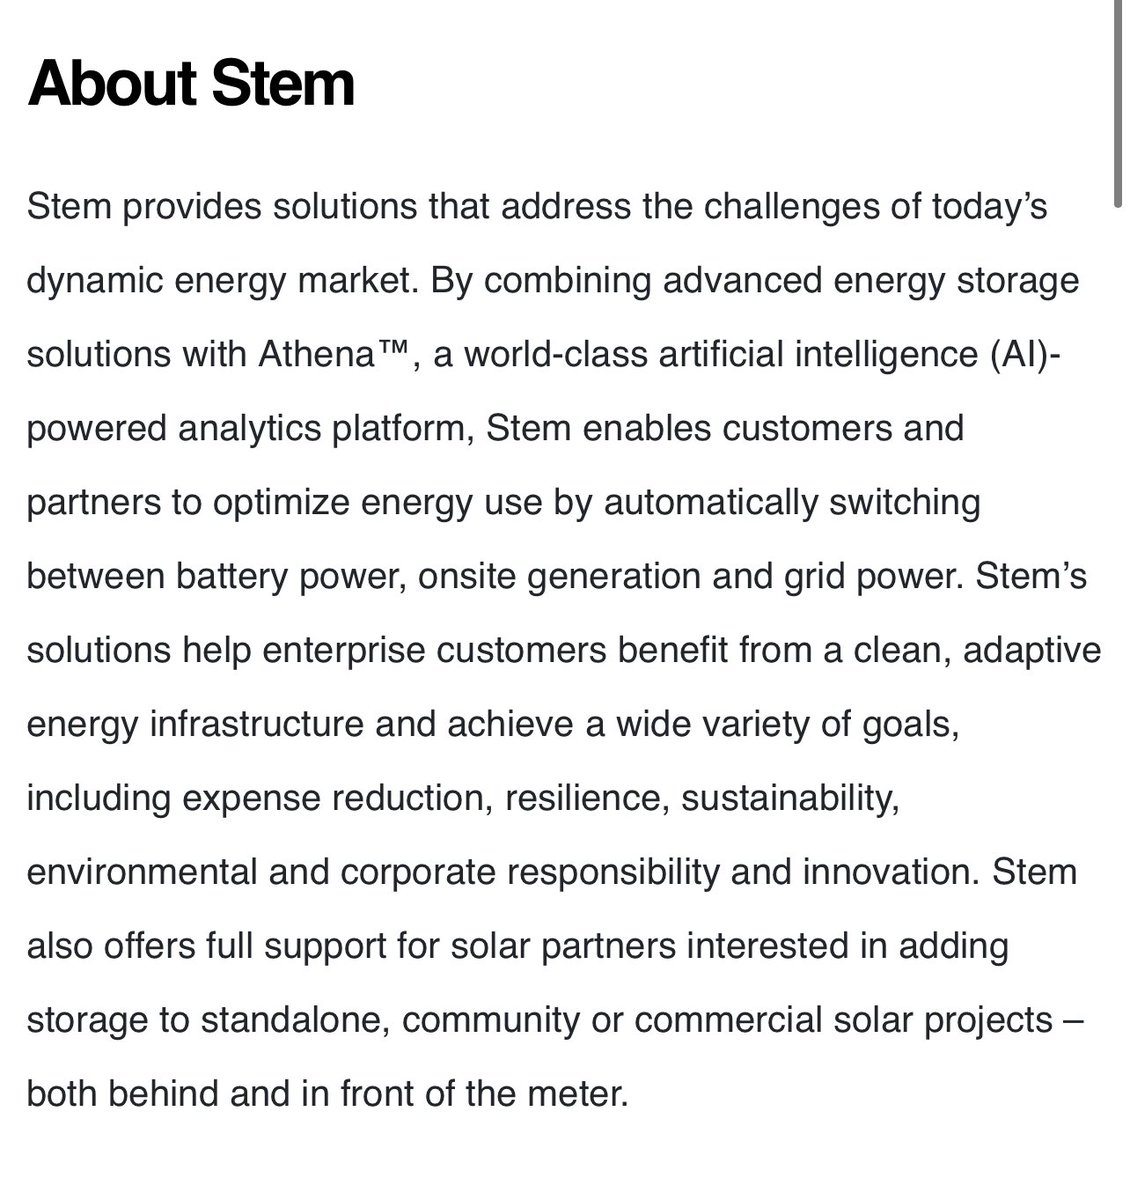  $STPKStem “builds and operates the largest digitally connected energy storage network for our customers. Our world class AI platform optimizes the value of our customers’ energy assets and facilitates their participation in energy markets” 